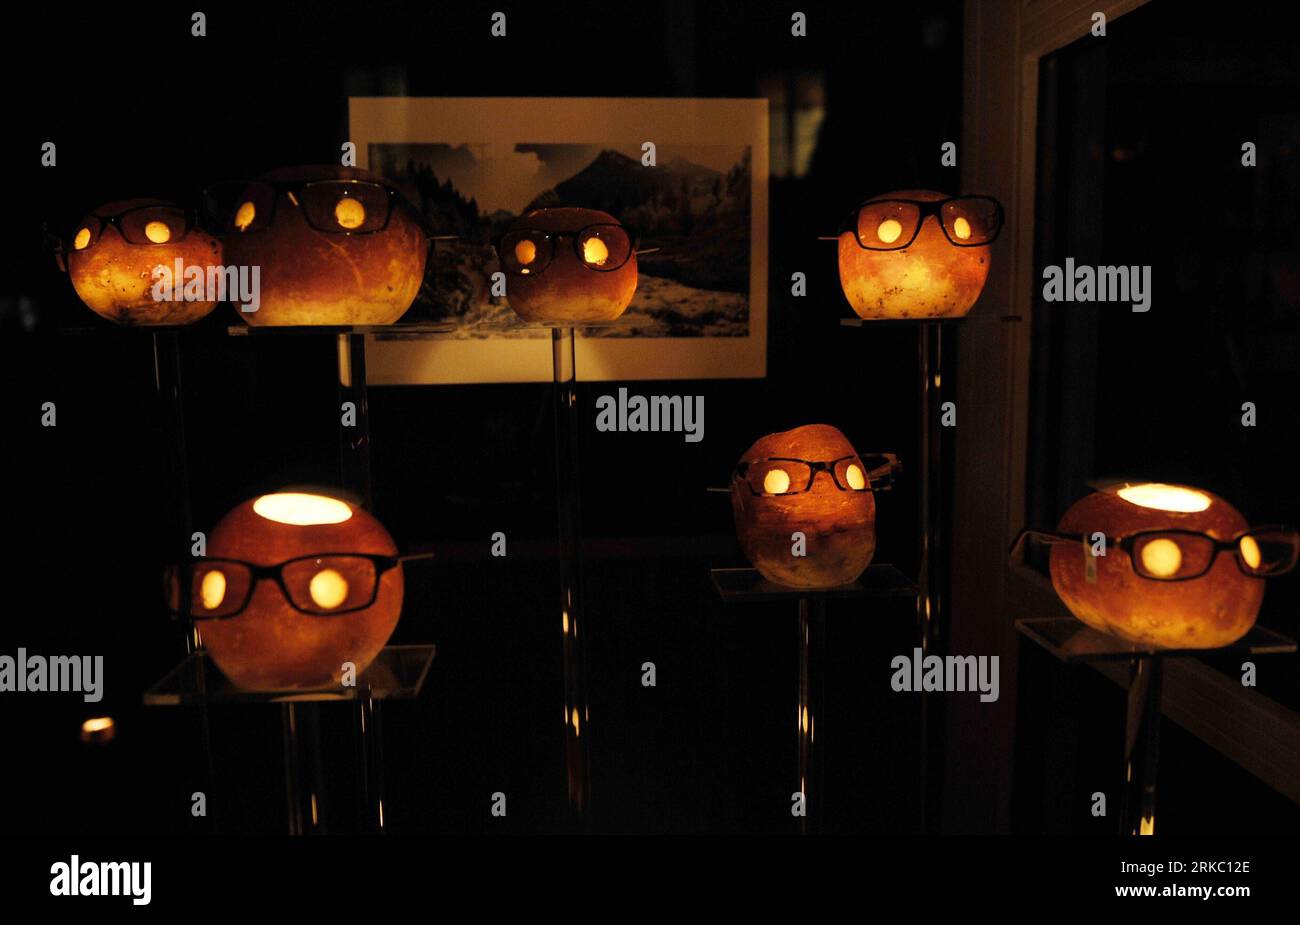 Bildnummer: 54636879  Datum: 13.11.2010  Copyright: imago/Xinhua (101114) --ZURICH, Nov. 14, 2010 (Xinhua) -- Turnip lamps are seen in a show window of a shop during the Raebechilbi (Turnip Fair) in the village of Richterswil on Lake Zurich, Switzerland, Nov. 13, 2010. Local residents hold Turnip Parade on the second Saturday of every November to mark the transition from autumn to winter. (Xinhua/Yu Yang) SWITZERLAND-ZURICH-TURNIP FAIR PUBLICATIONxNOTxINxCHN Gesellschaft Laterne Laternenfest Tradition Laternenumzug kbdig xdp 2010 quer premiumd  o0 Objekte    Bildnummer 54636879 Date 13 11 2010 Stock Photo